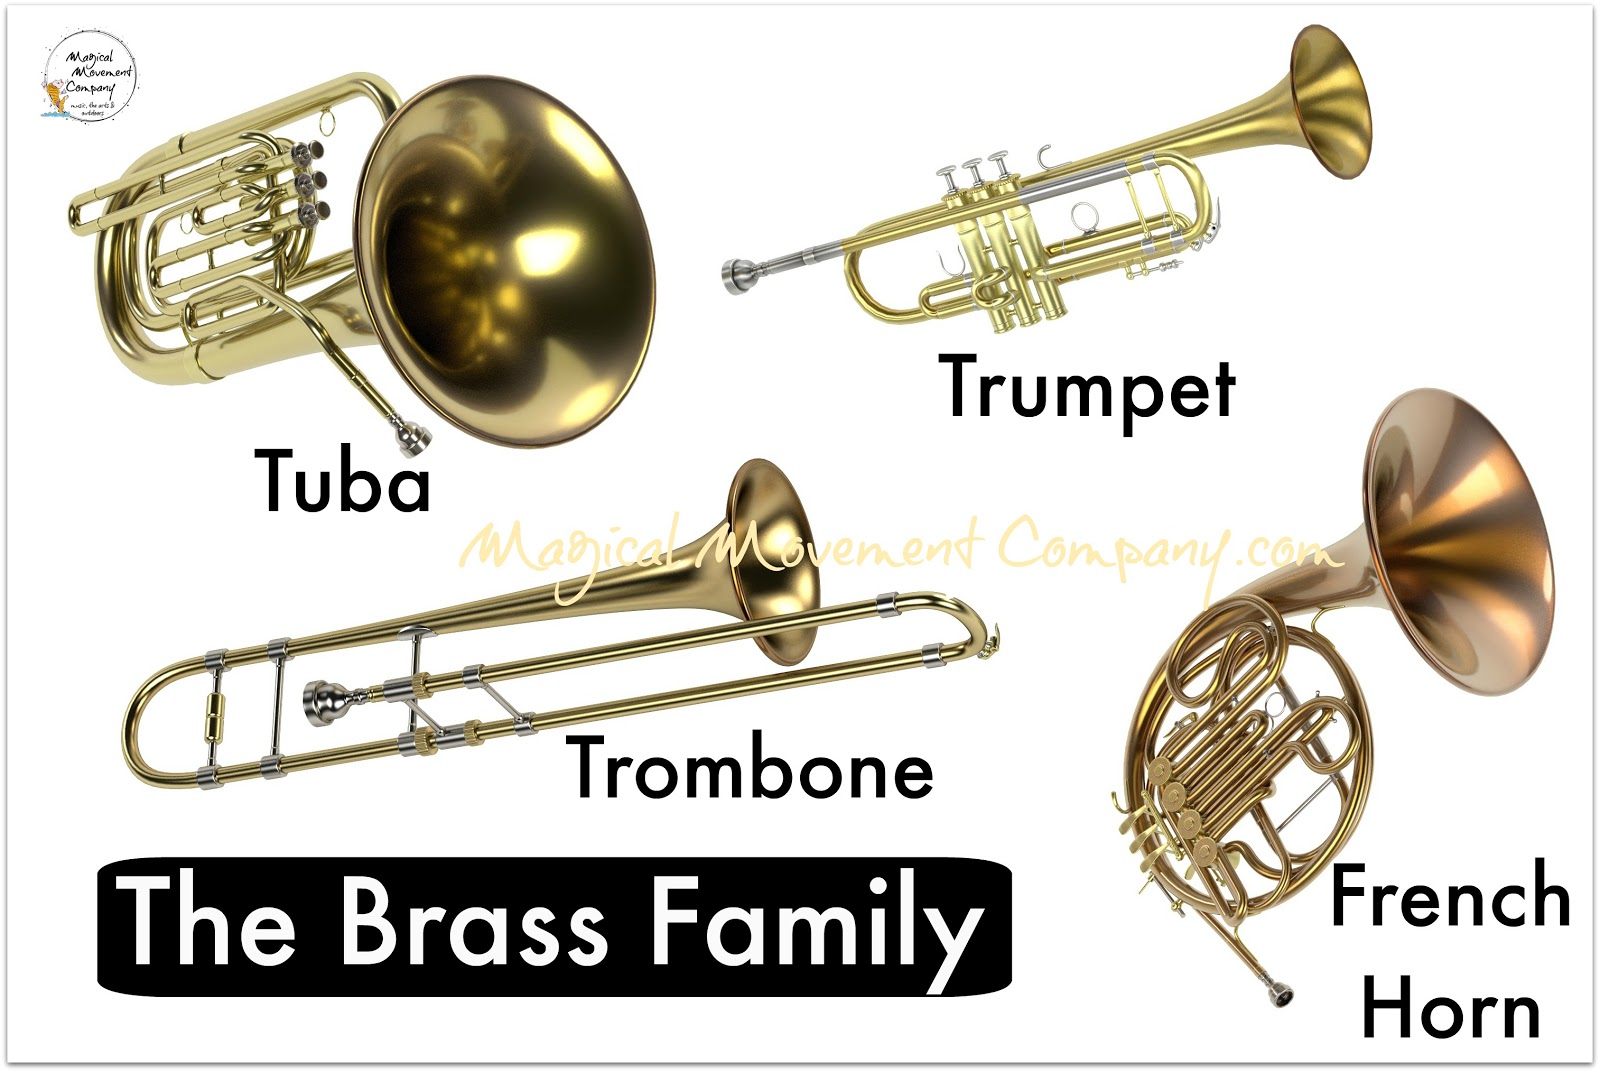 BRASS FAMILY, INSTRUMENTS OF THE ORCHESTRA, LESSON #5